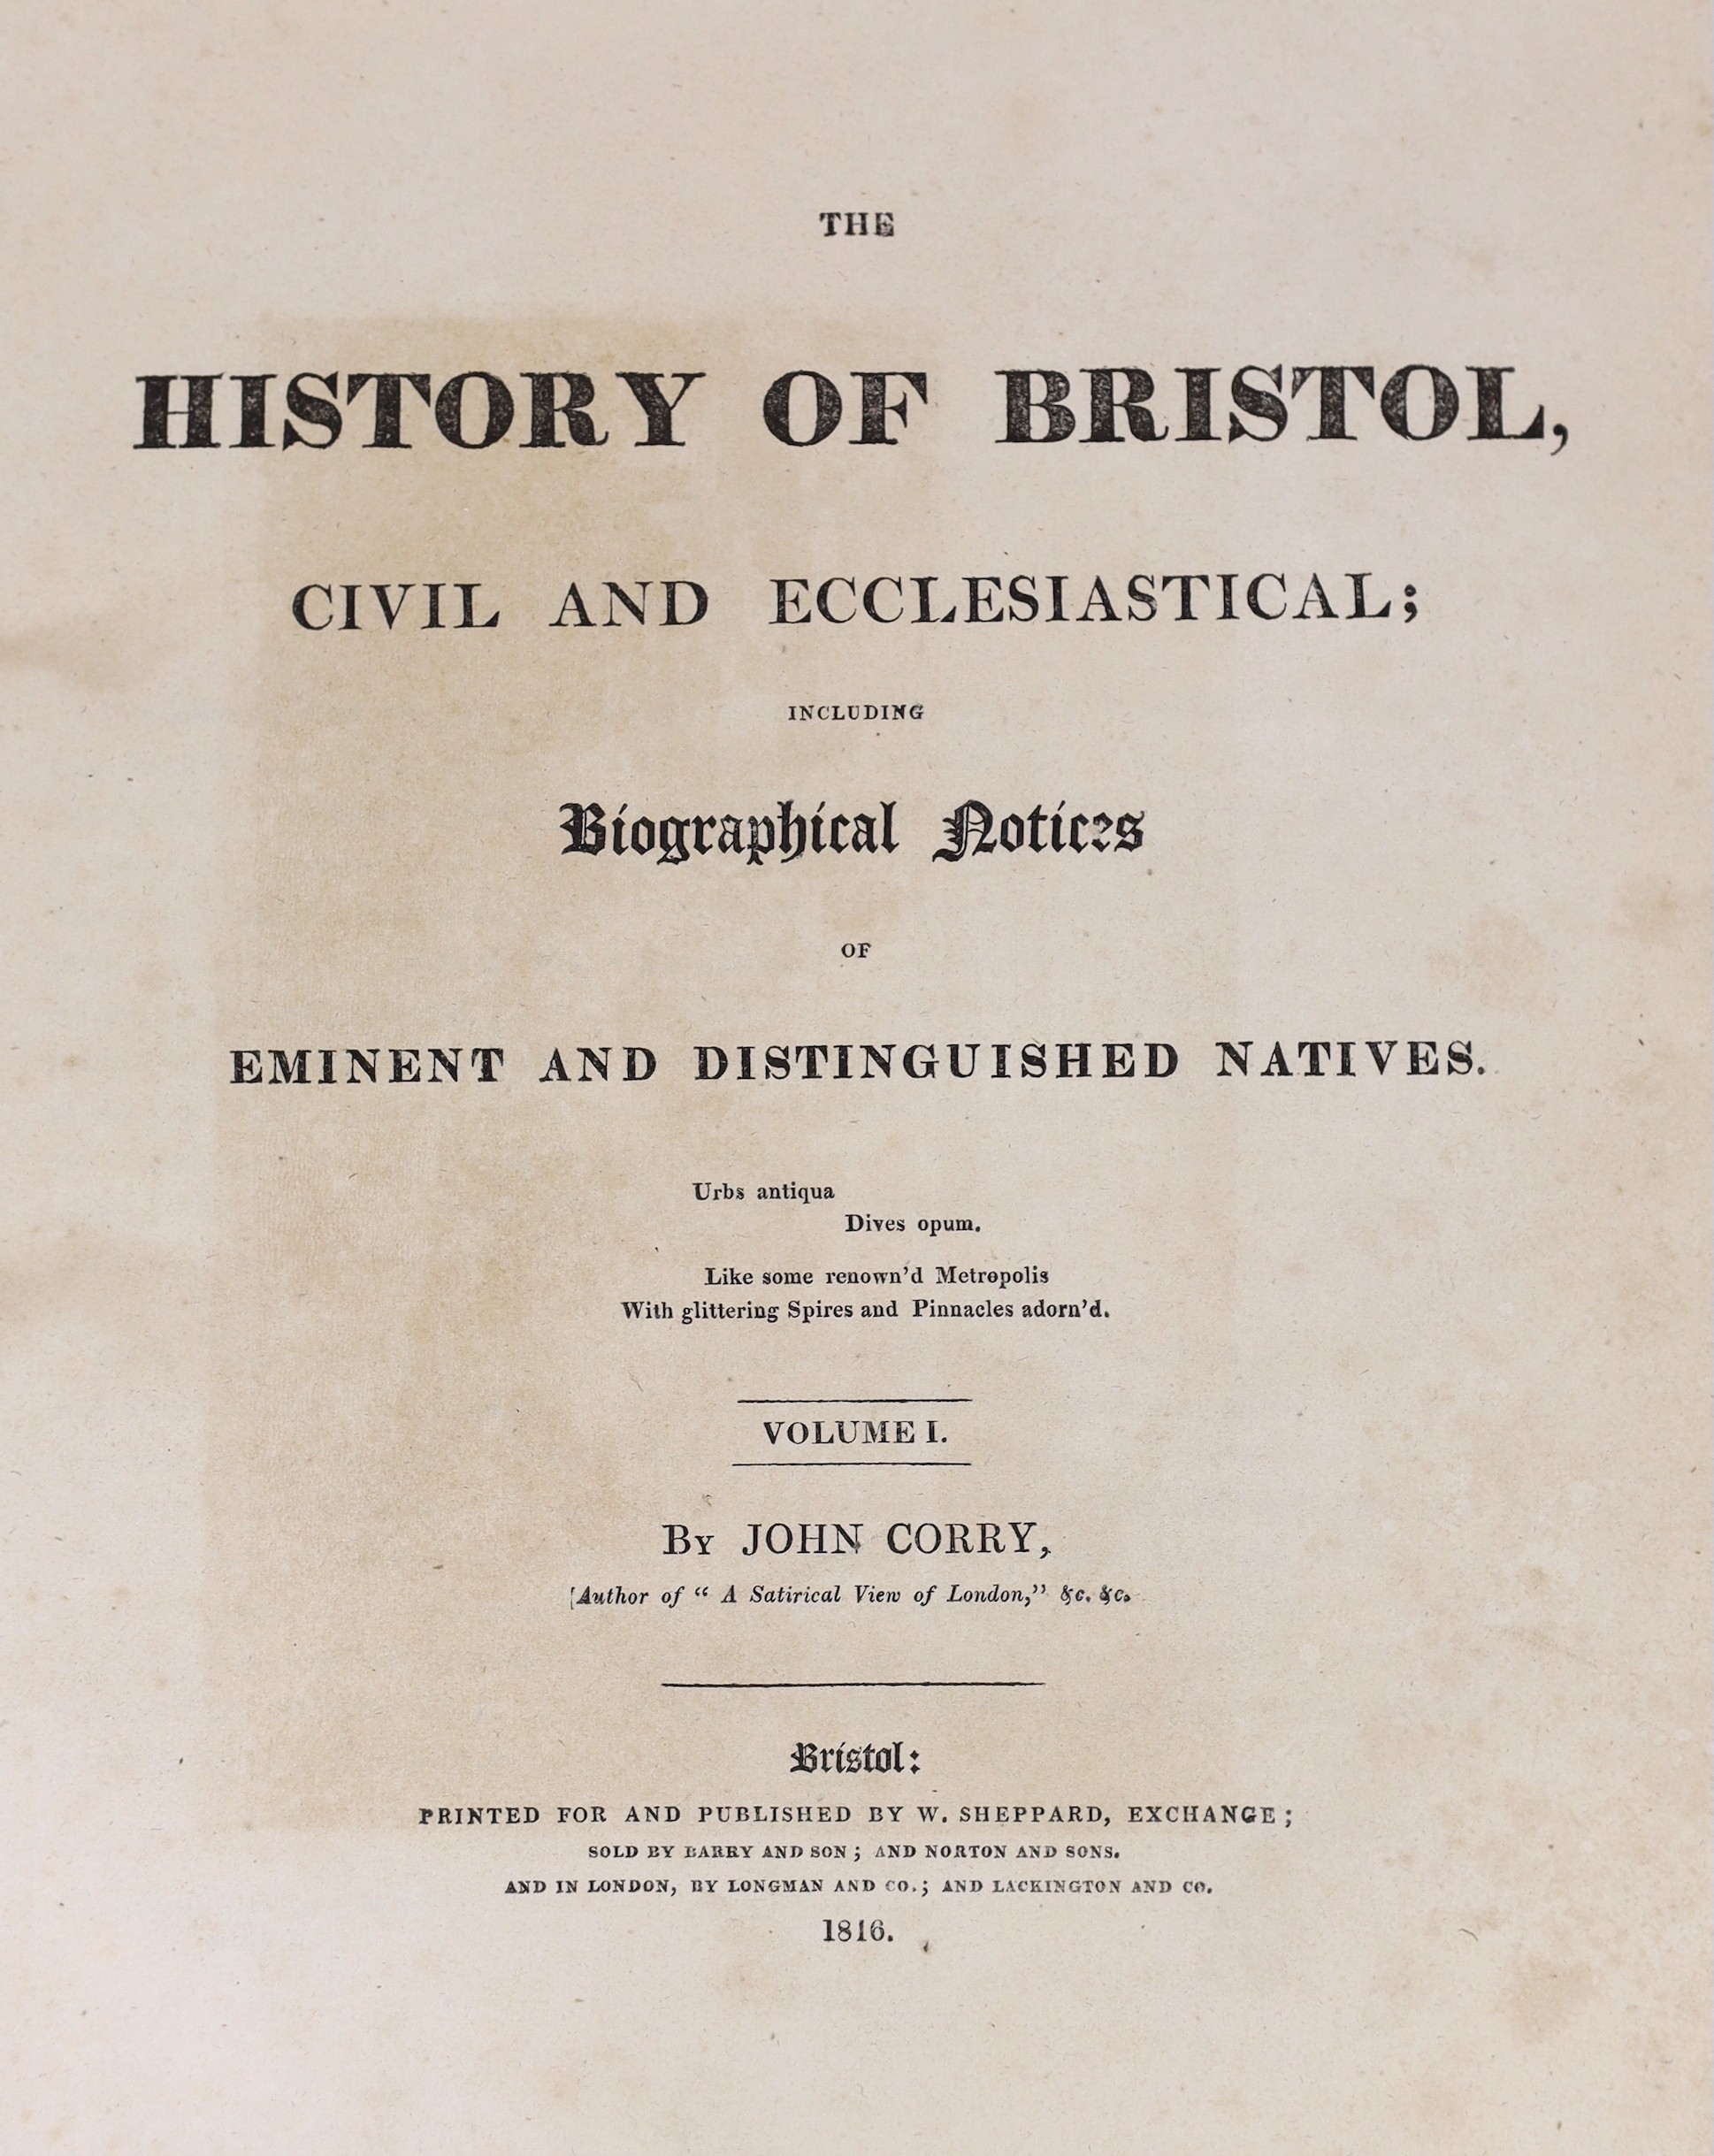 SOMERSET, BRISTOL: Corry, John and Evans, Rev. John - The History of Bristol, Civil and Ecclesiastical ... 2 vols. (in one). 12 plates, half title, advert. leaf; old half calf and marbled boards, later rebacked with gilt